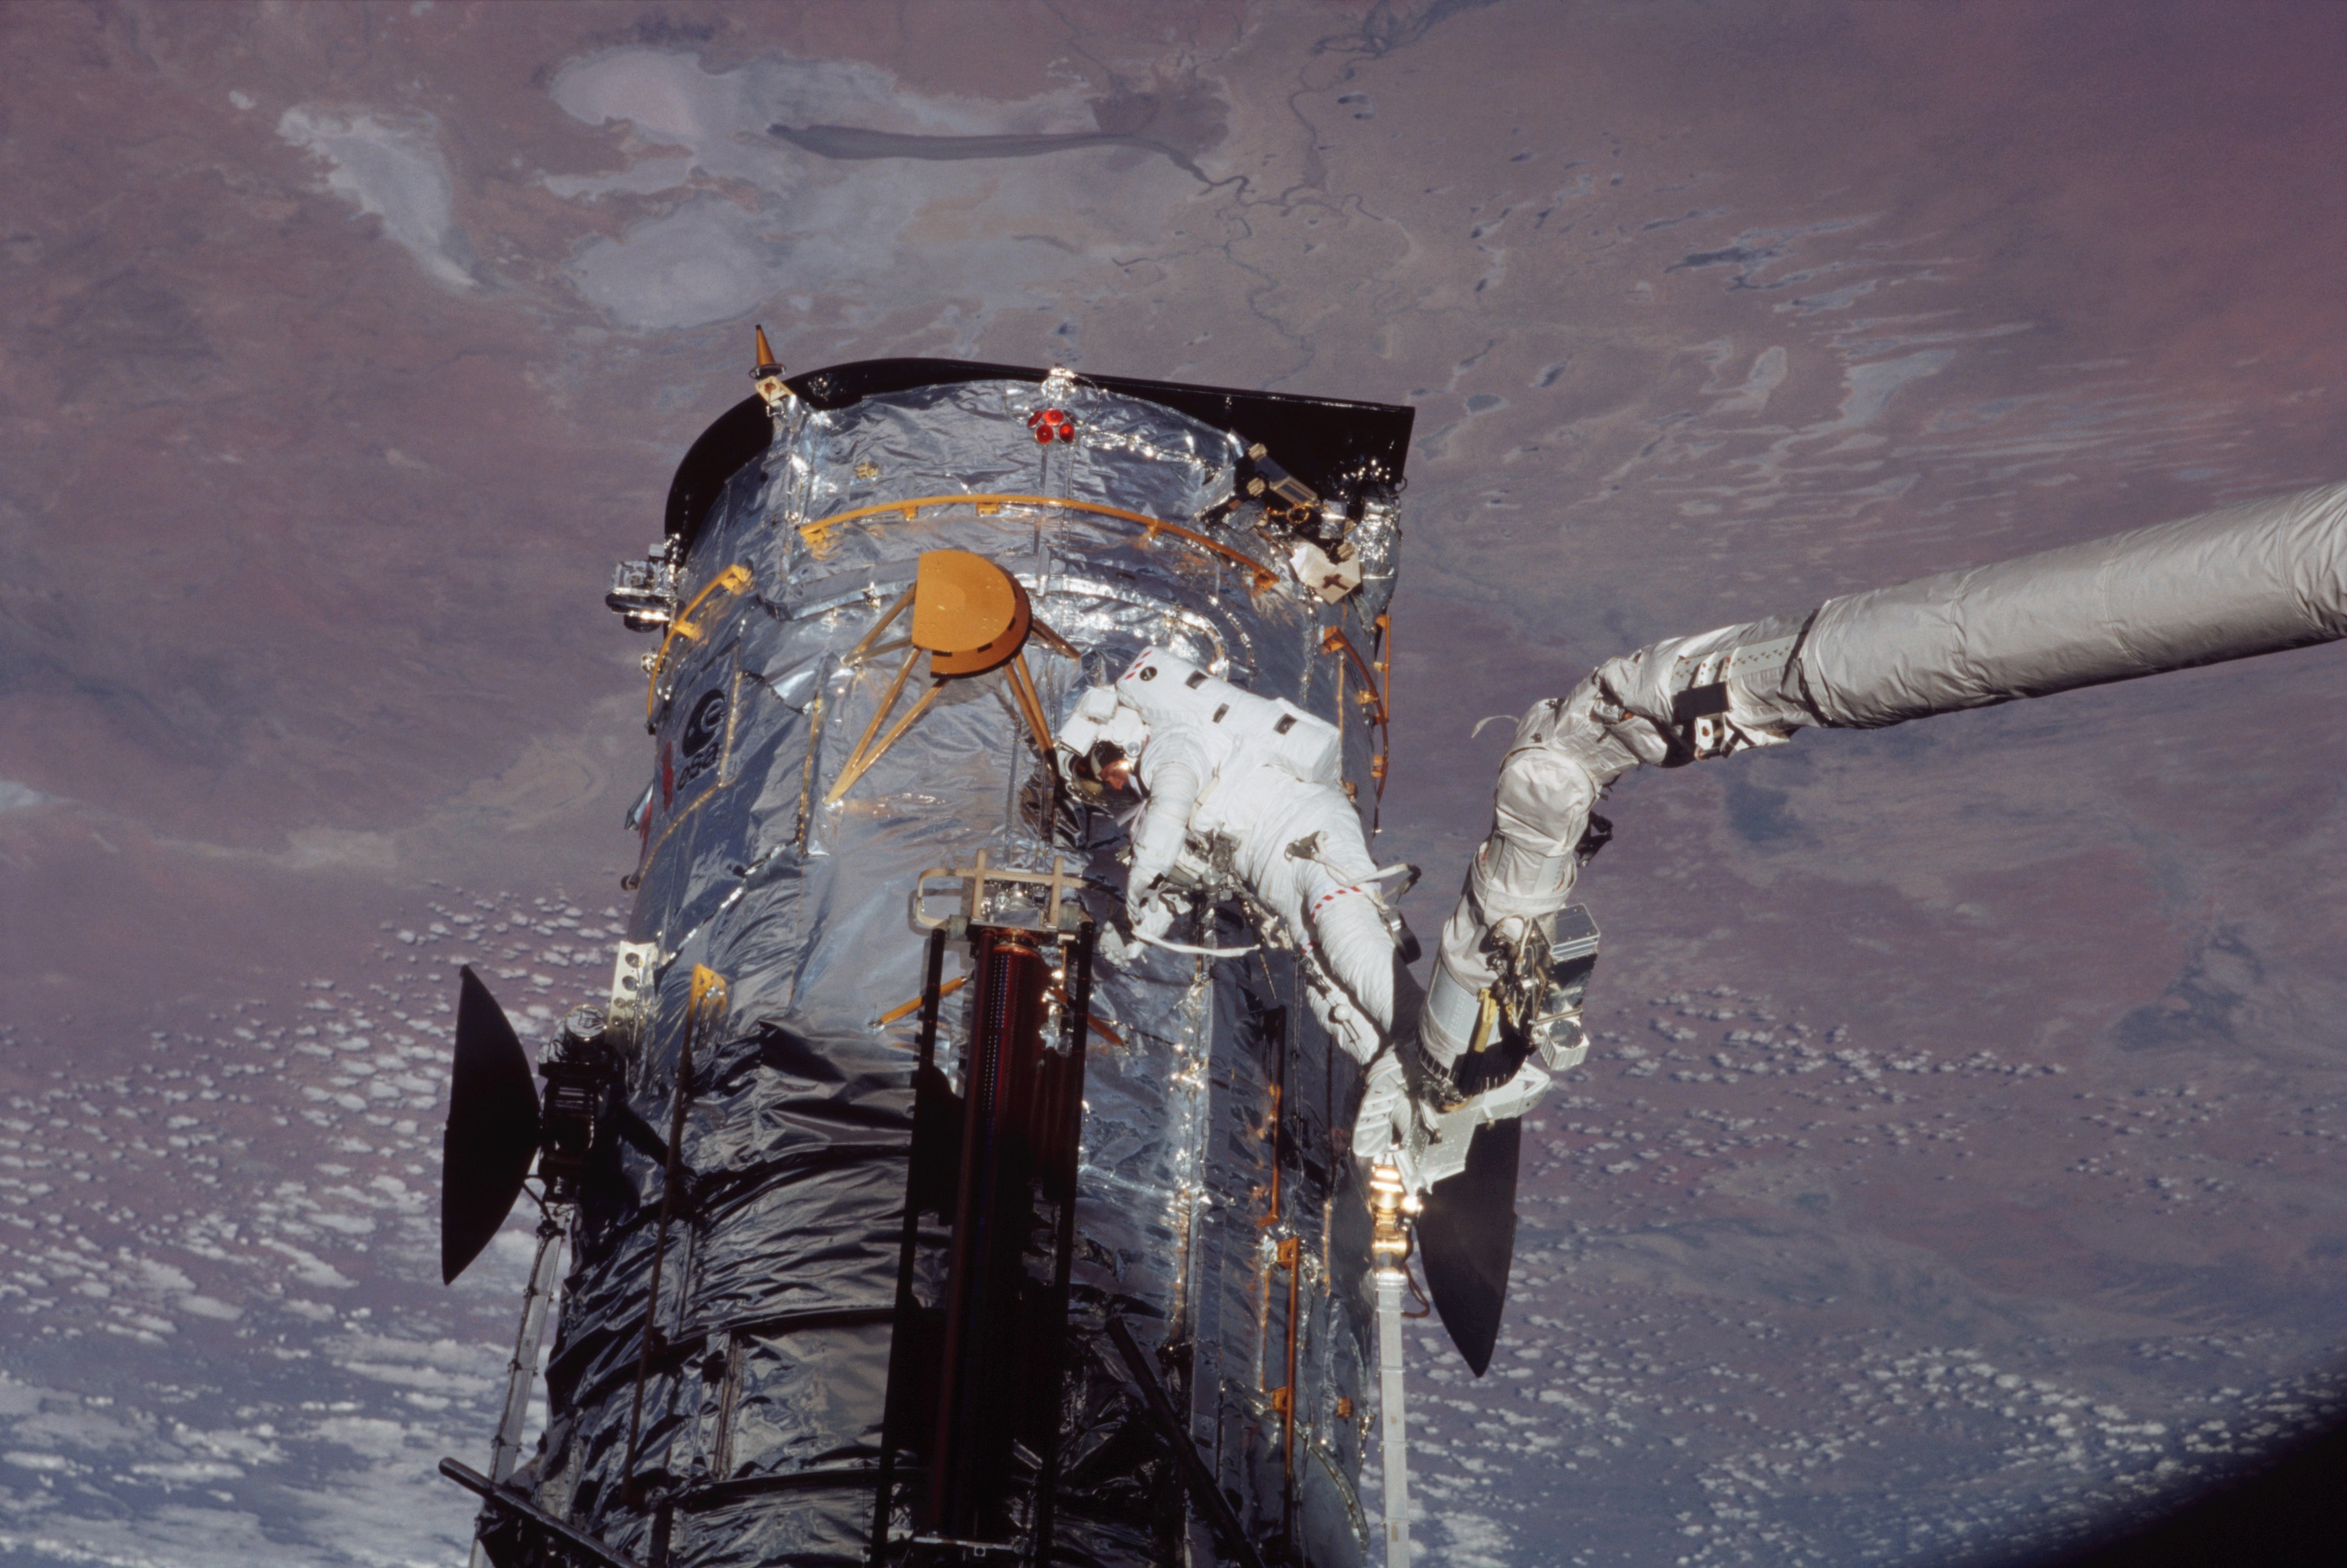 An astronaut at the end of the shuttle's robotic arm works with a solar array.